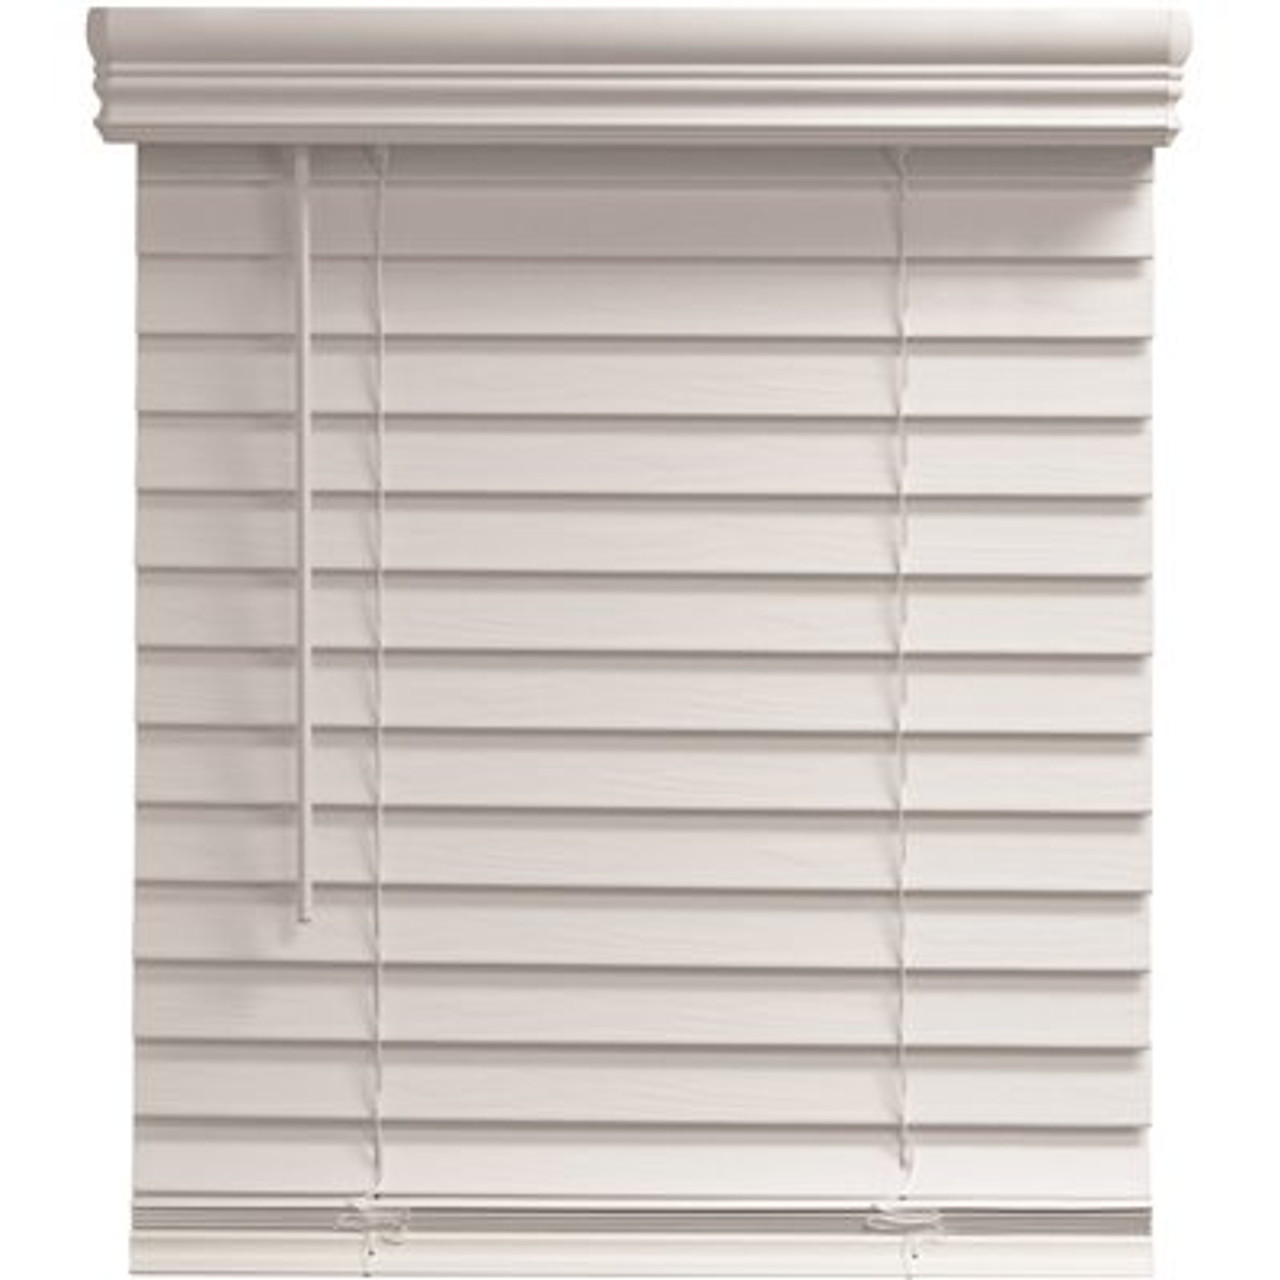 Pre-Cut 58 in. W x 60 in. L White Cordless Room Darkening Faux Wood Blinds with 2 in. Slats